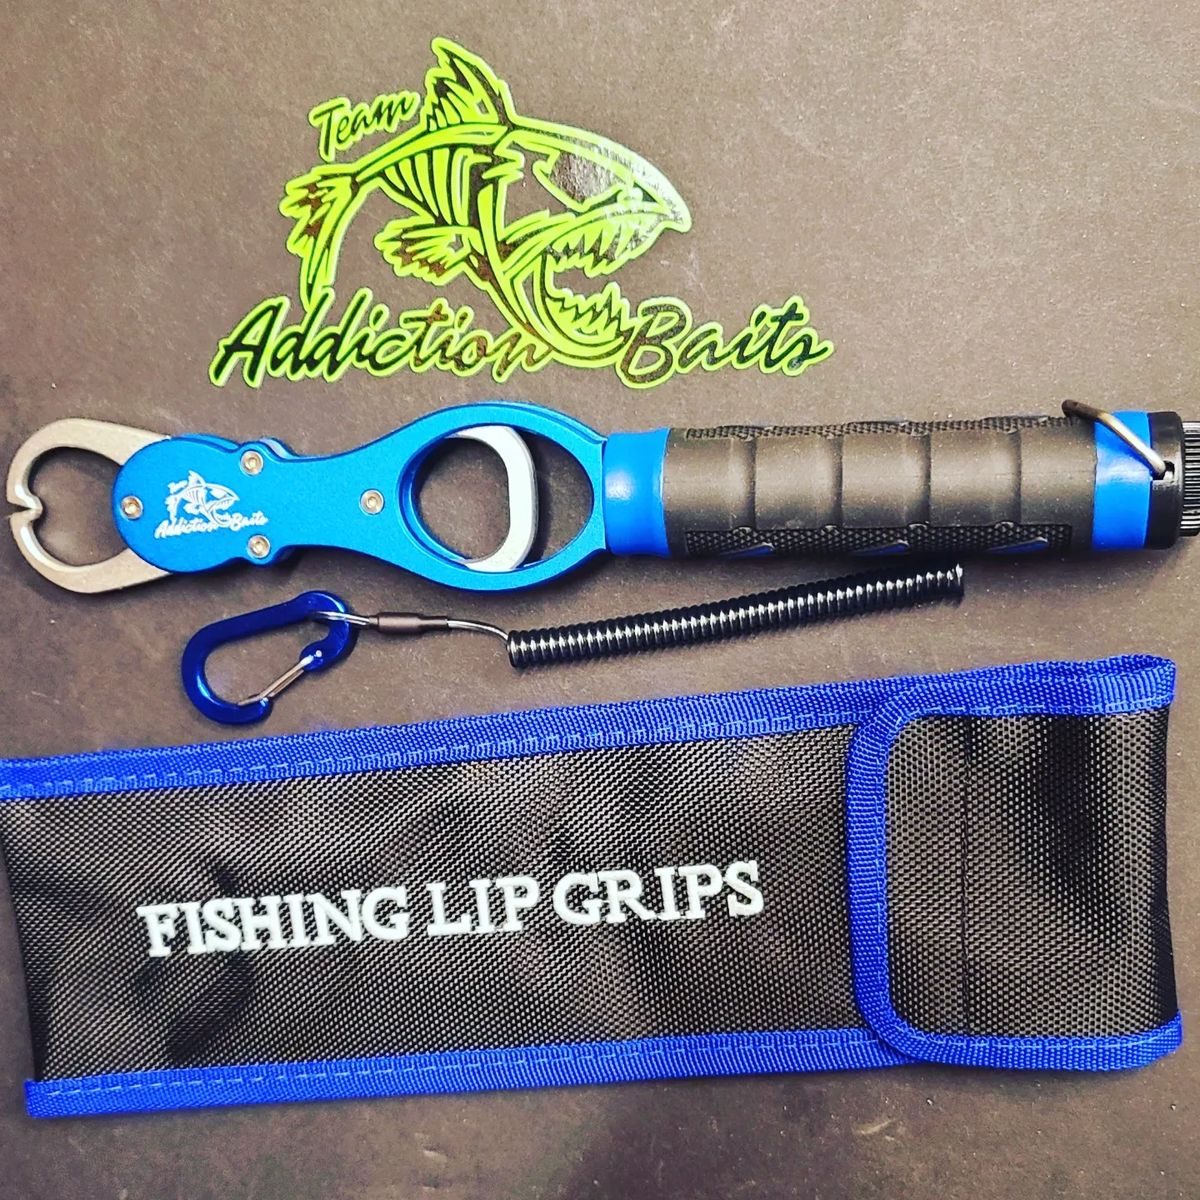 Addiction baits fish grippers